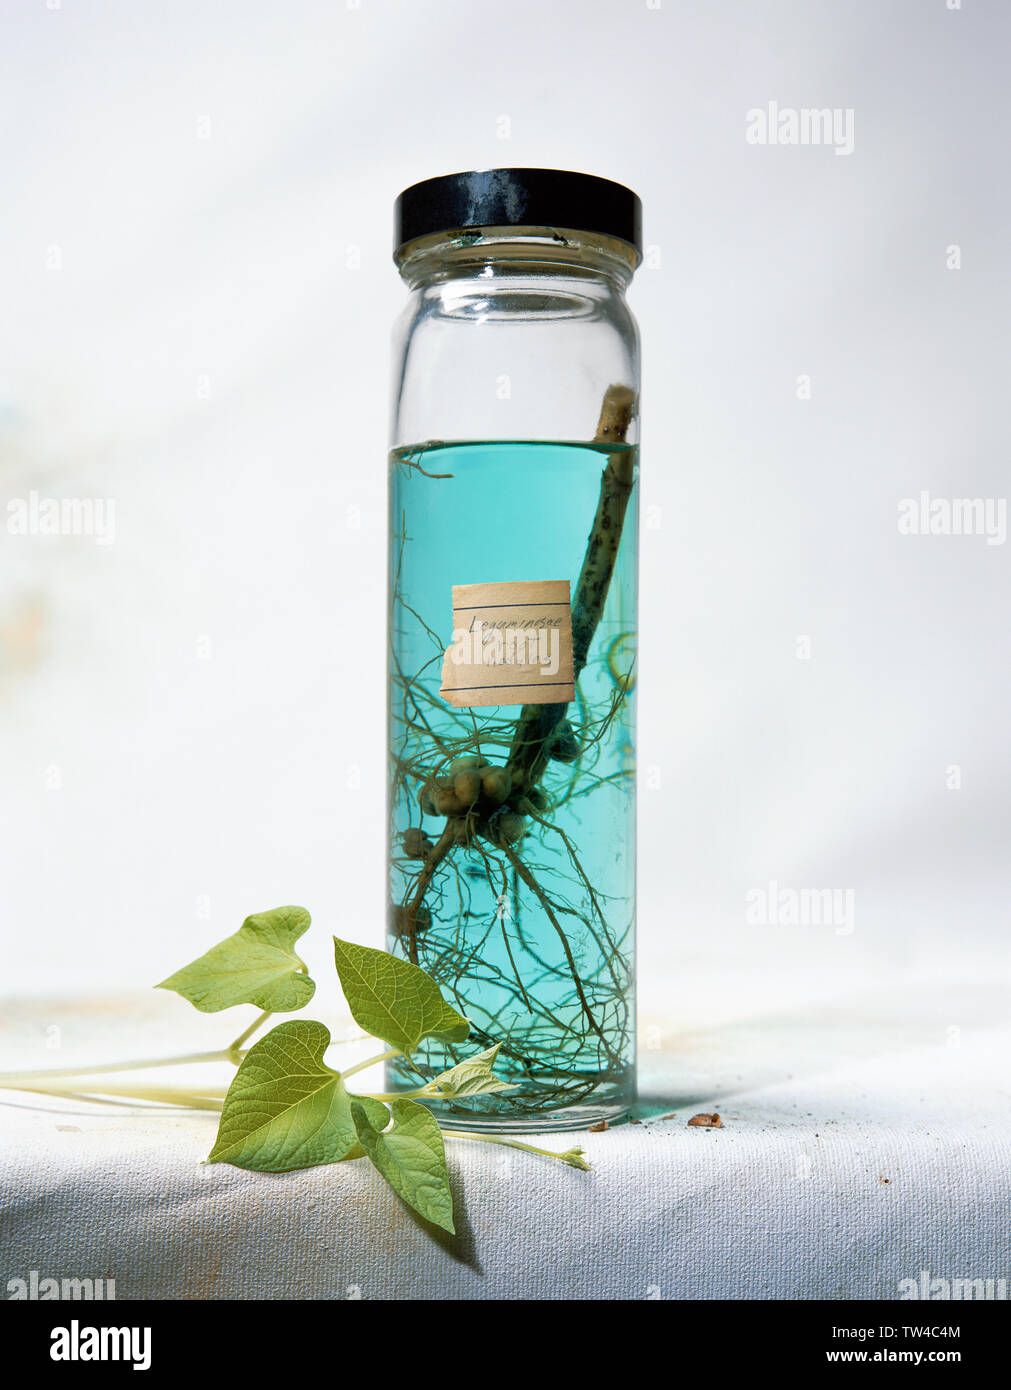 Botanical science laboratory specimen jar with preserved legume root nodules and bean plant leaves Stock Photo